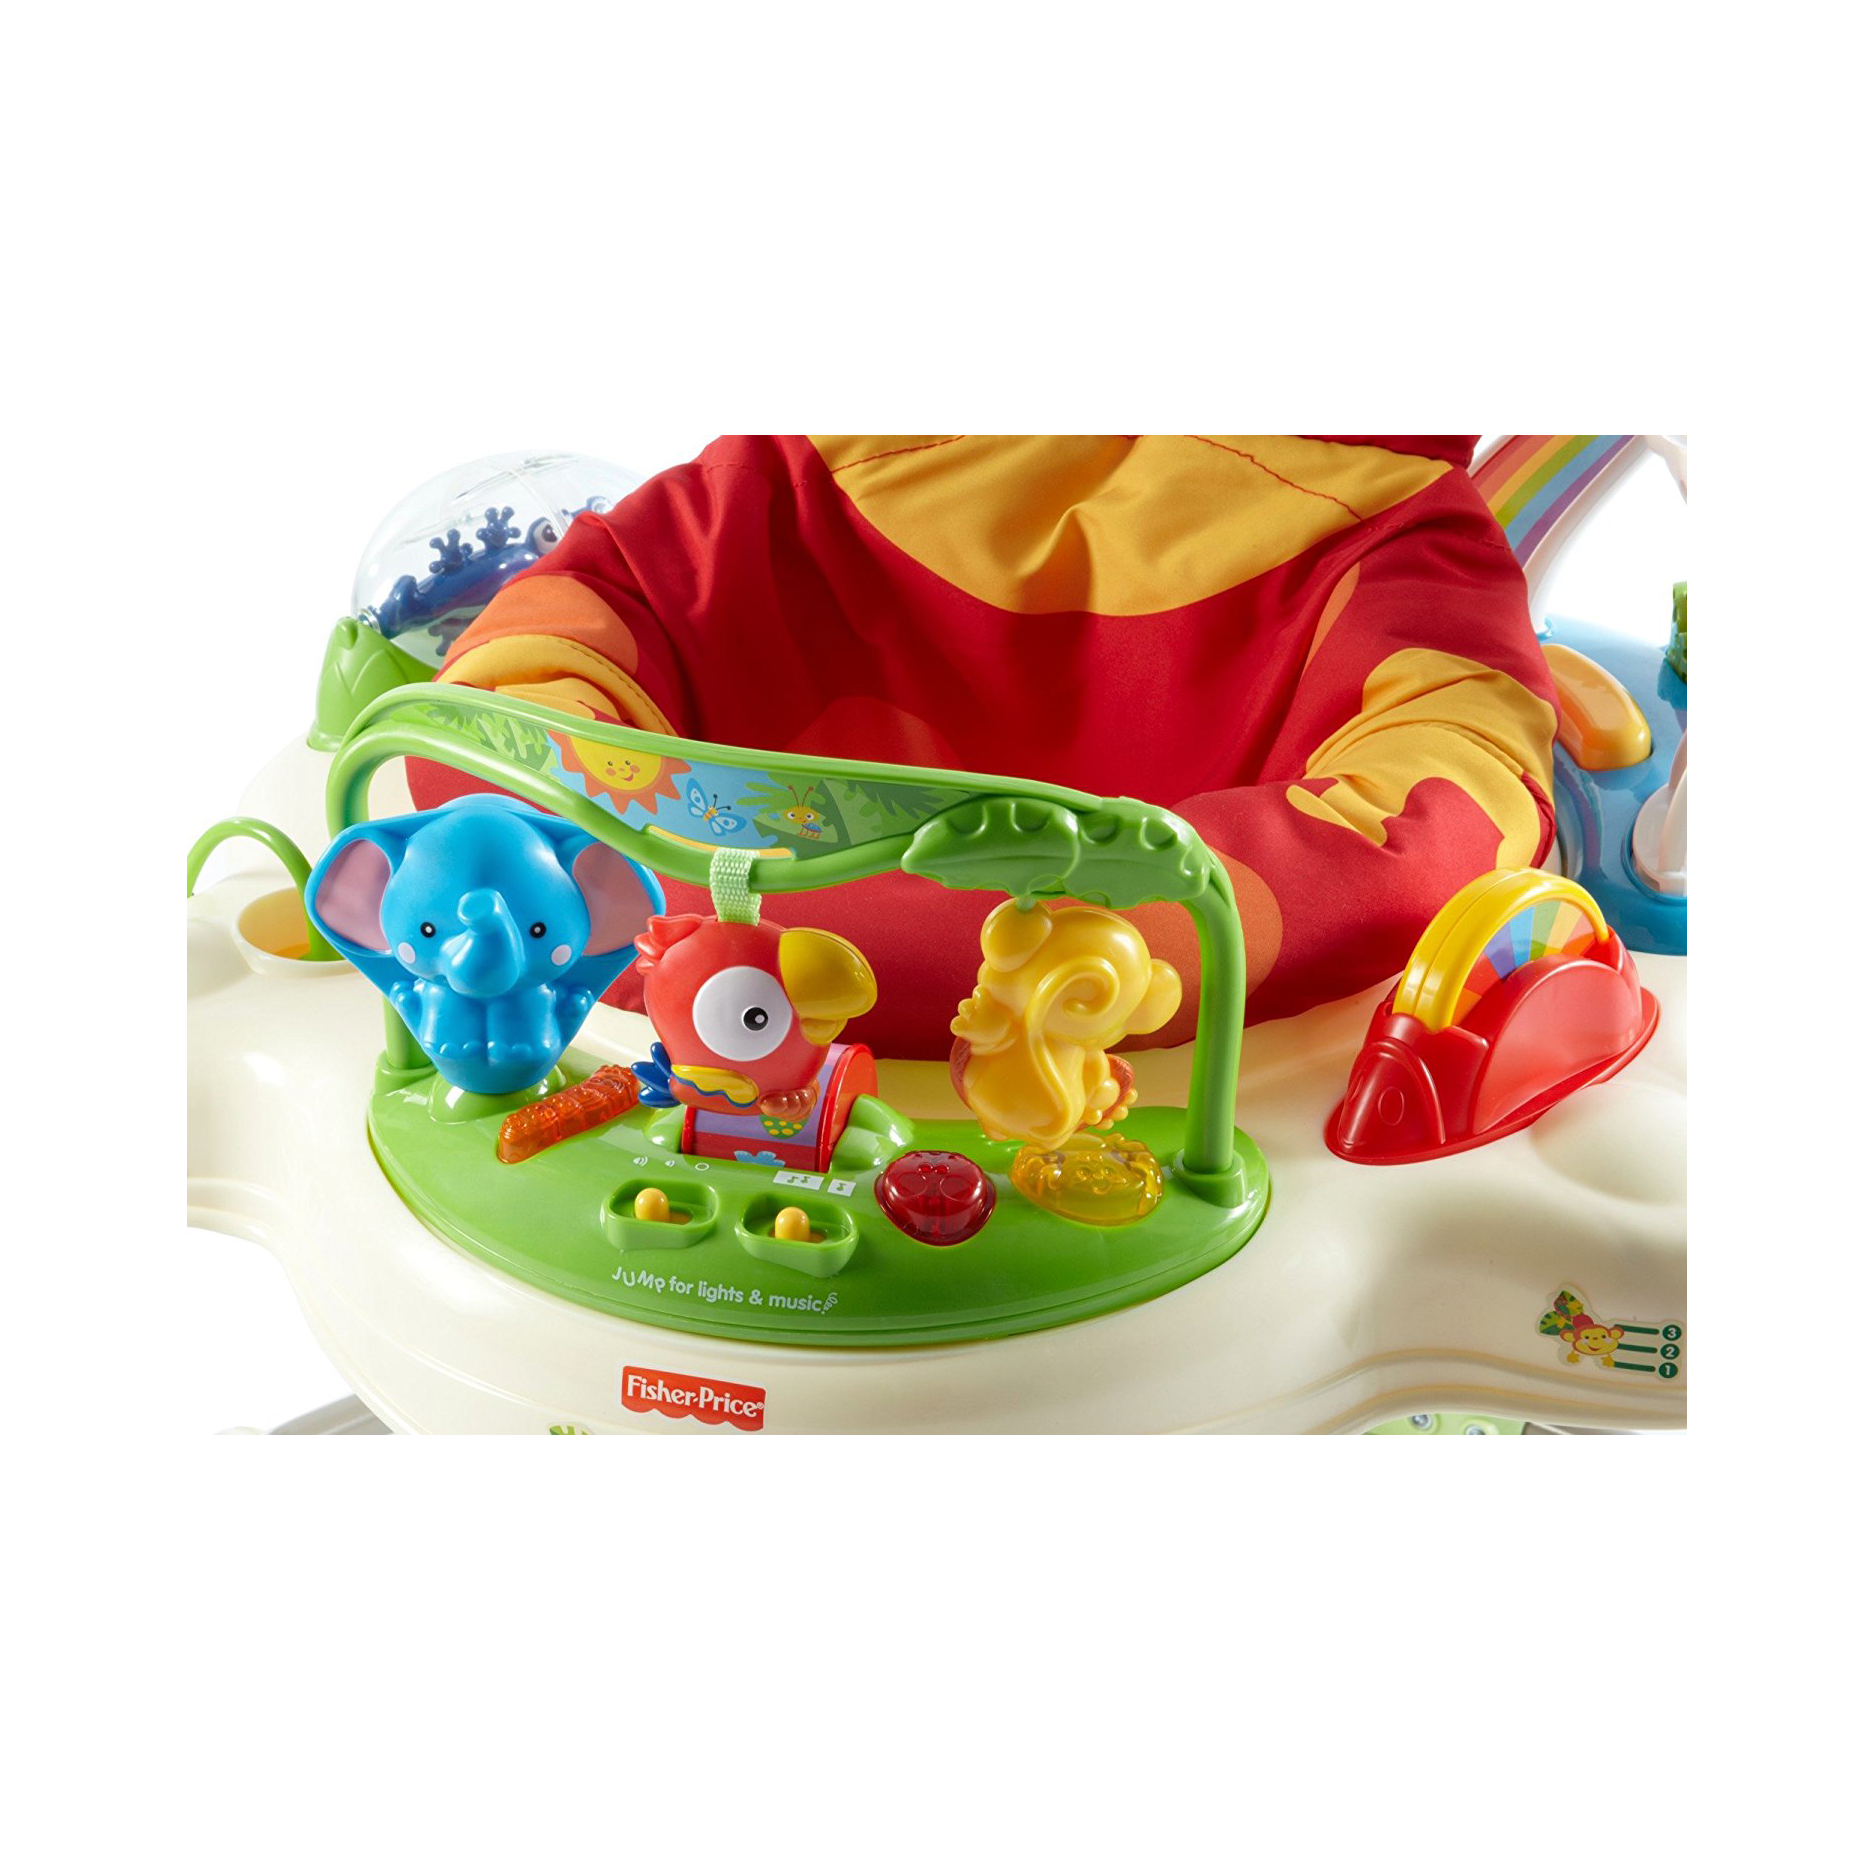 fisher price rainforest jumperoo weight limit